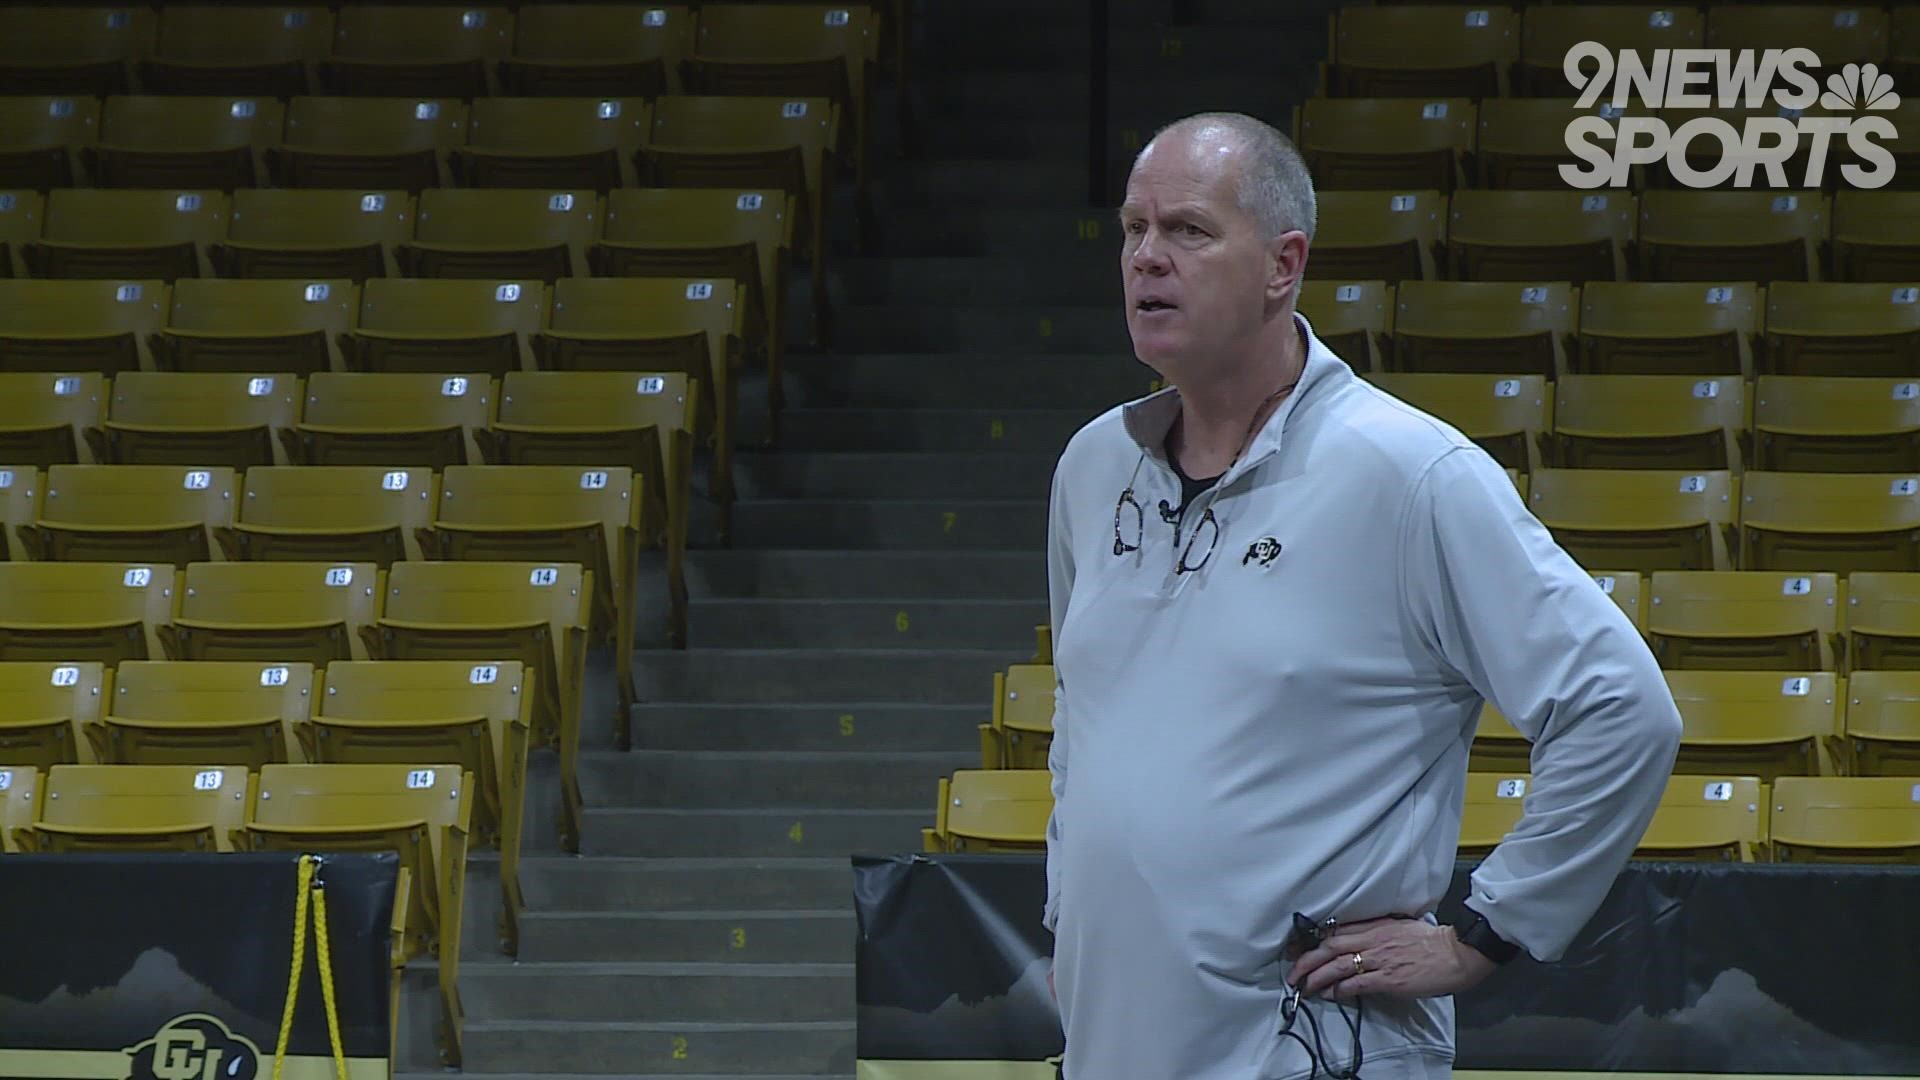 The University of Colorado men's basketball coach has been selected to lead the FIBA U18 team this summer.